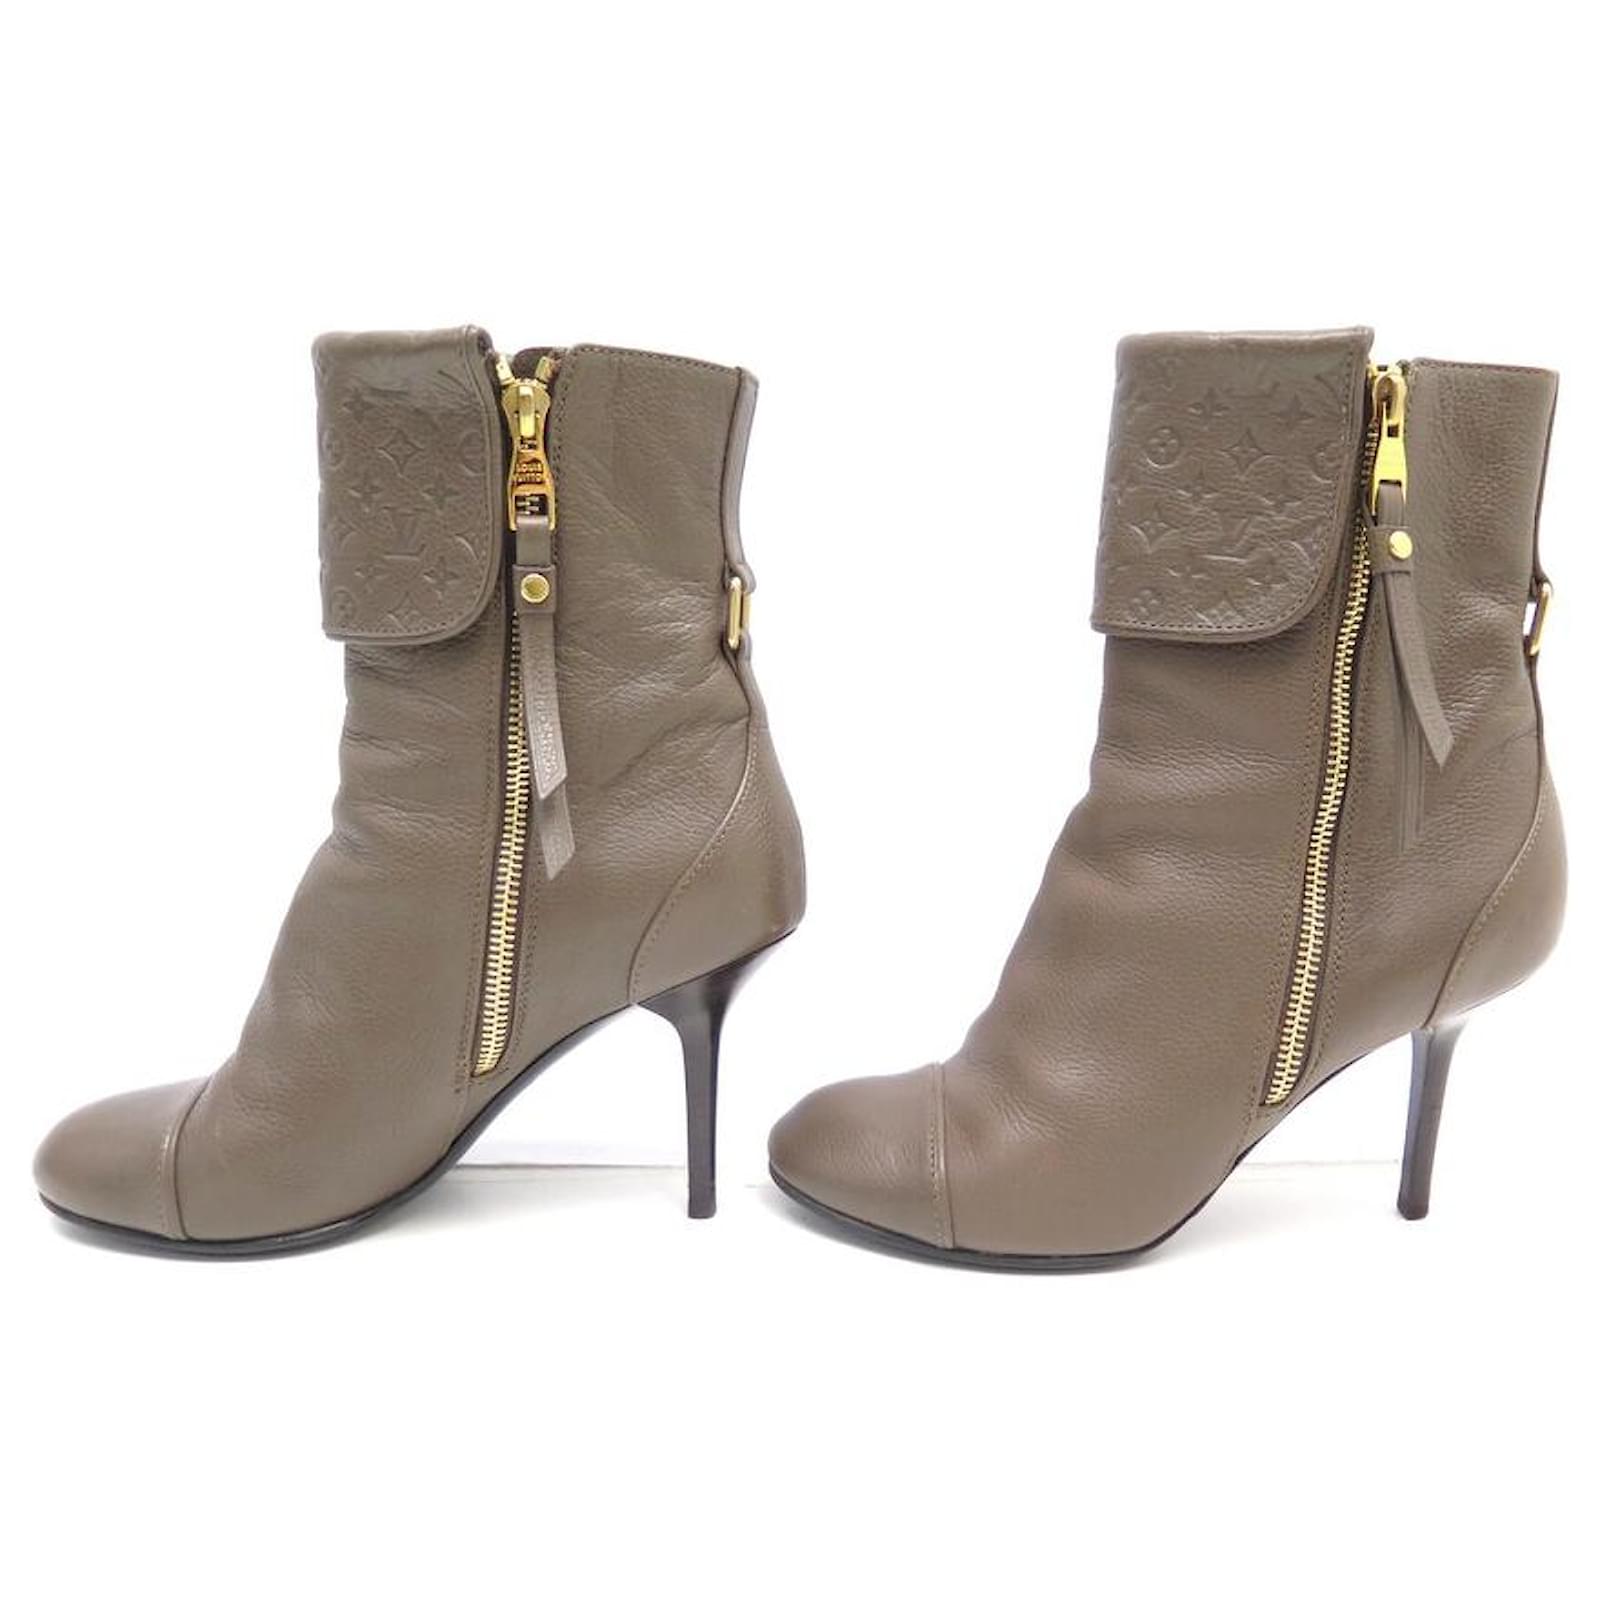 LOUIS VUITTON INSPIRED INFINITY ANKLE BOOTS 37 LEATHER MONOGRAM